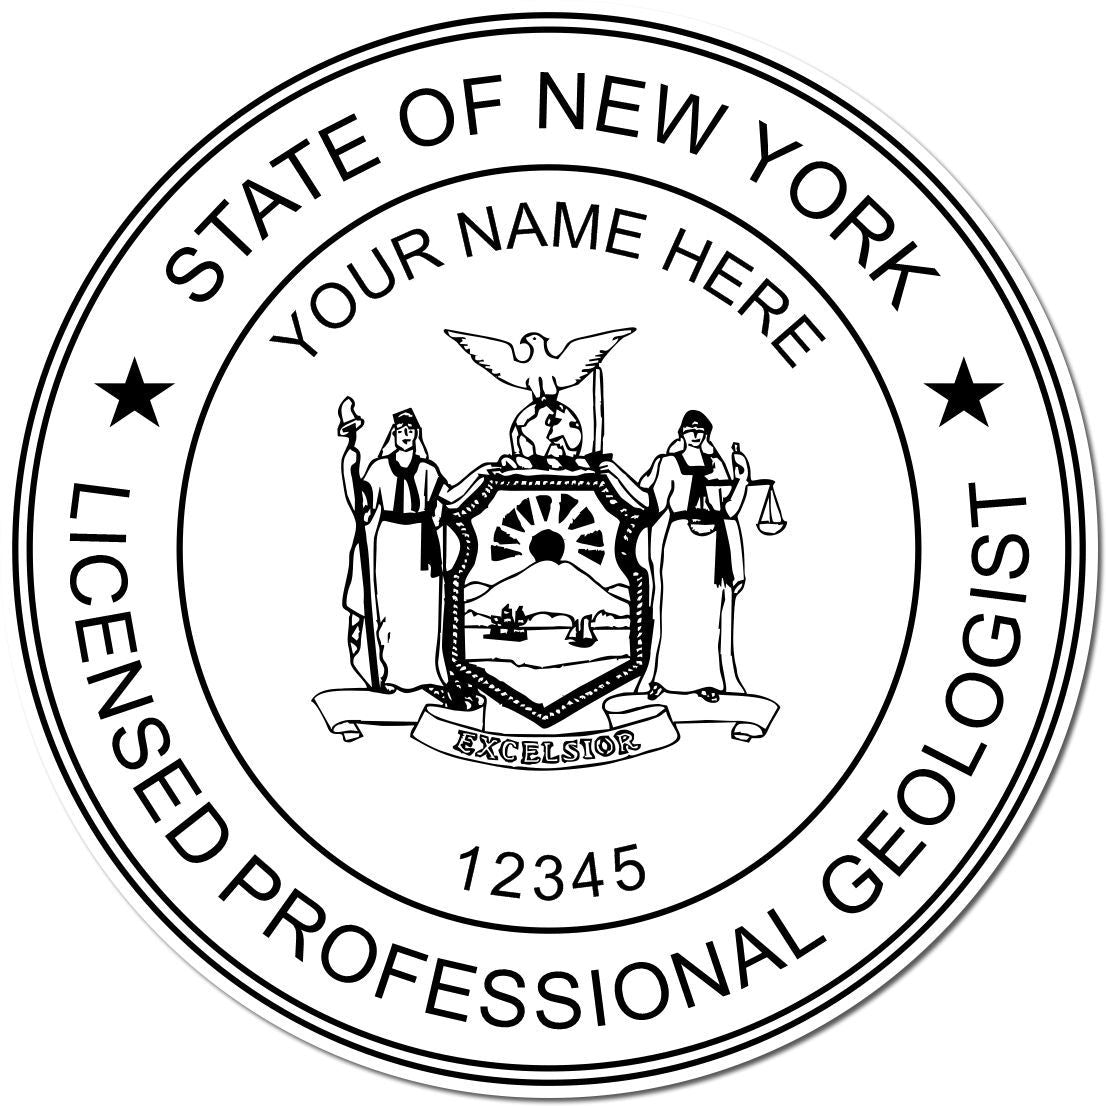 This paper is stamped with a sample imprint of the Slim Pre-Inked New York Professional Geologist Seal Stamp, signifying its quality and reliability.